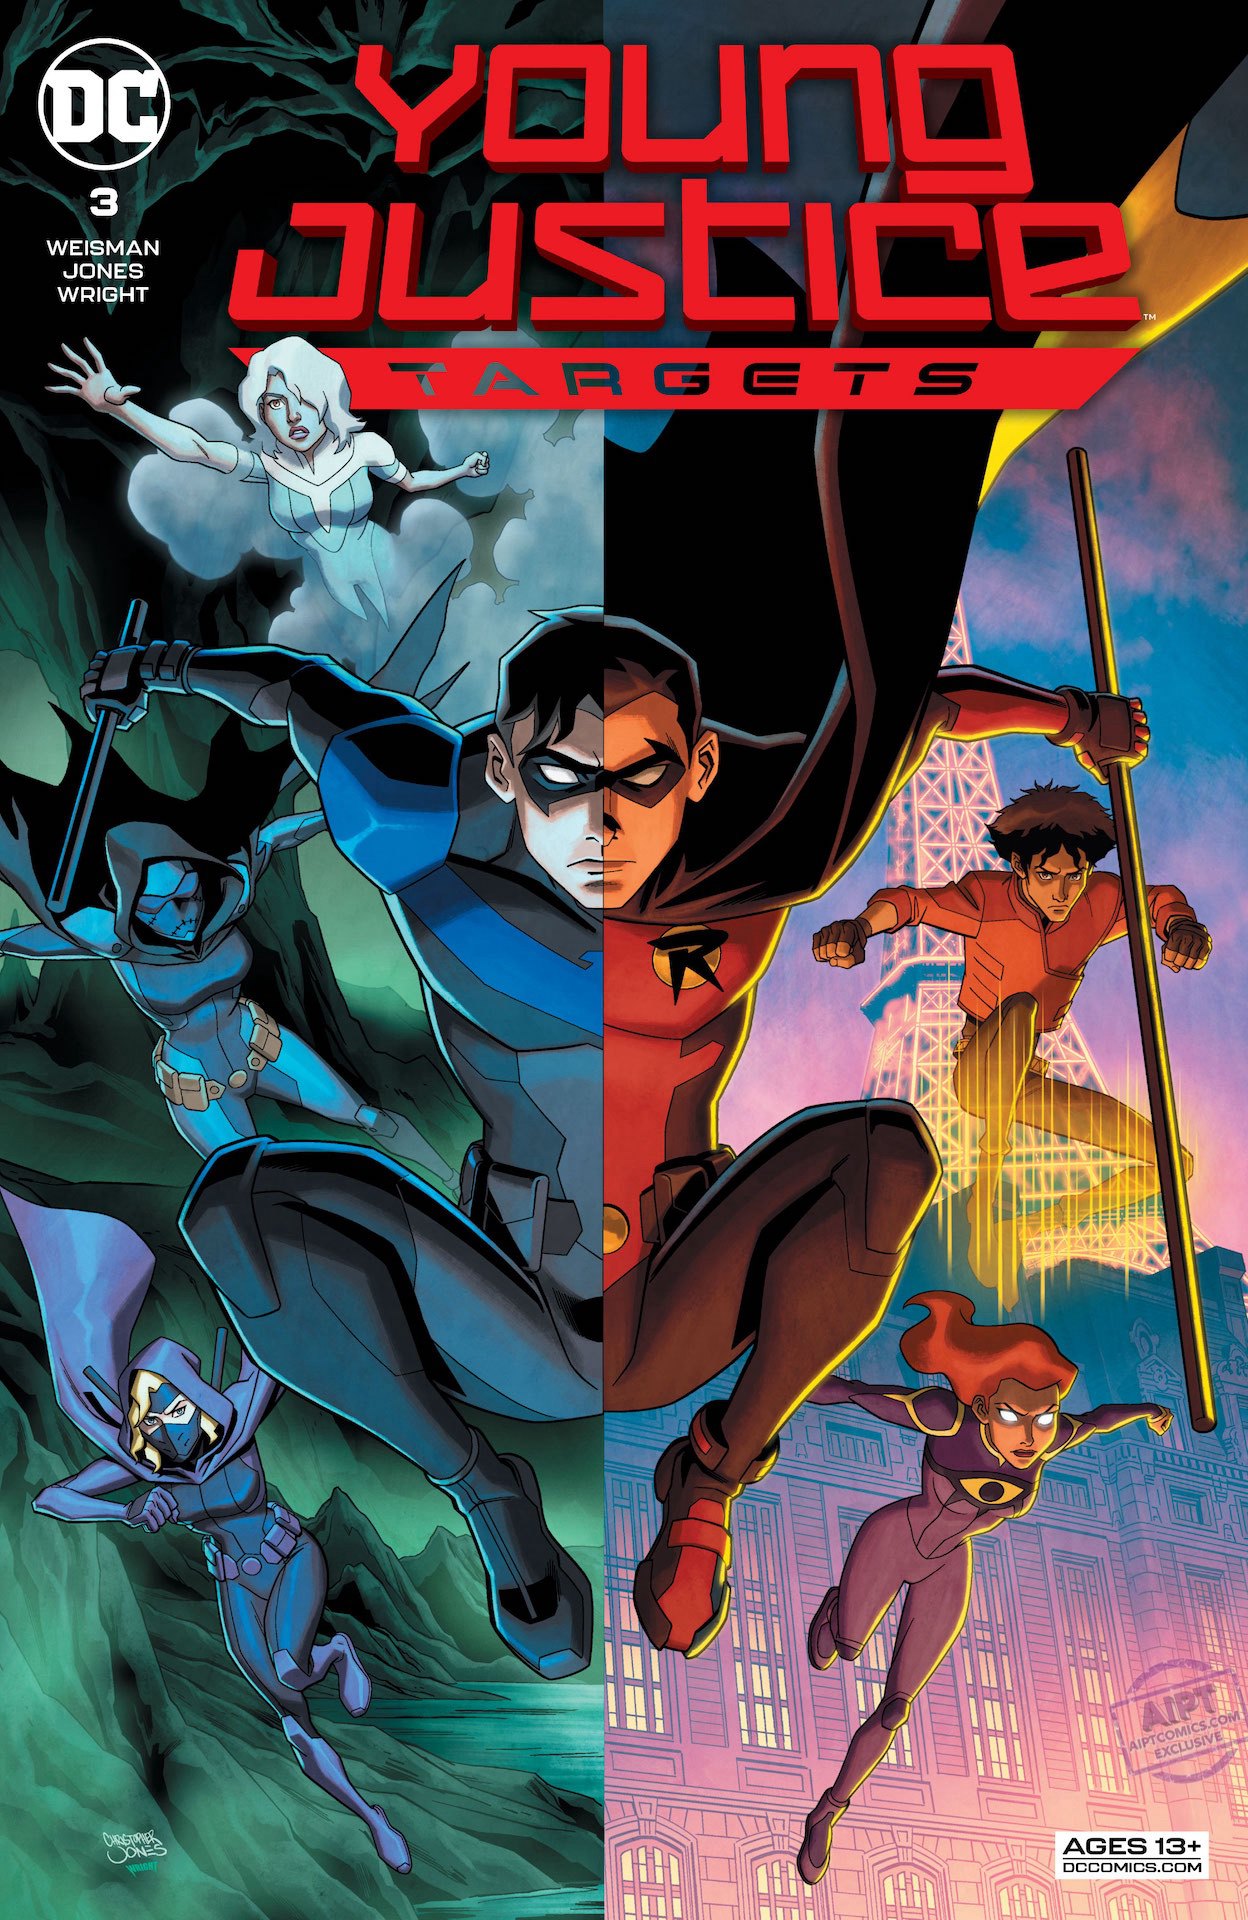 DC Preview: Young Justice: Targets #3